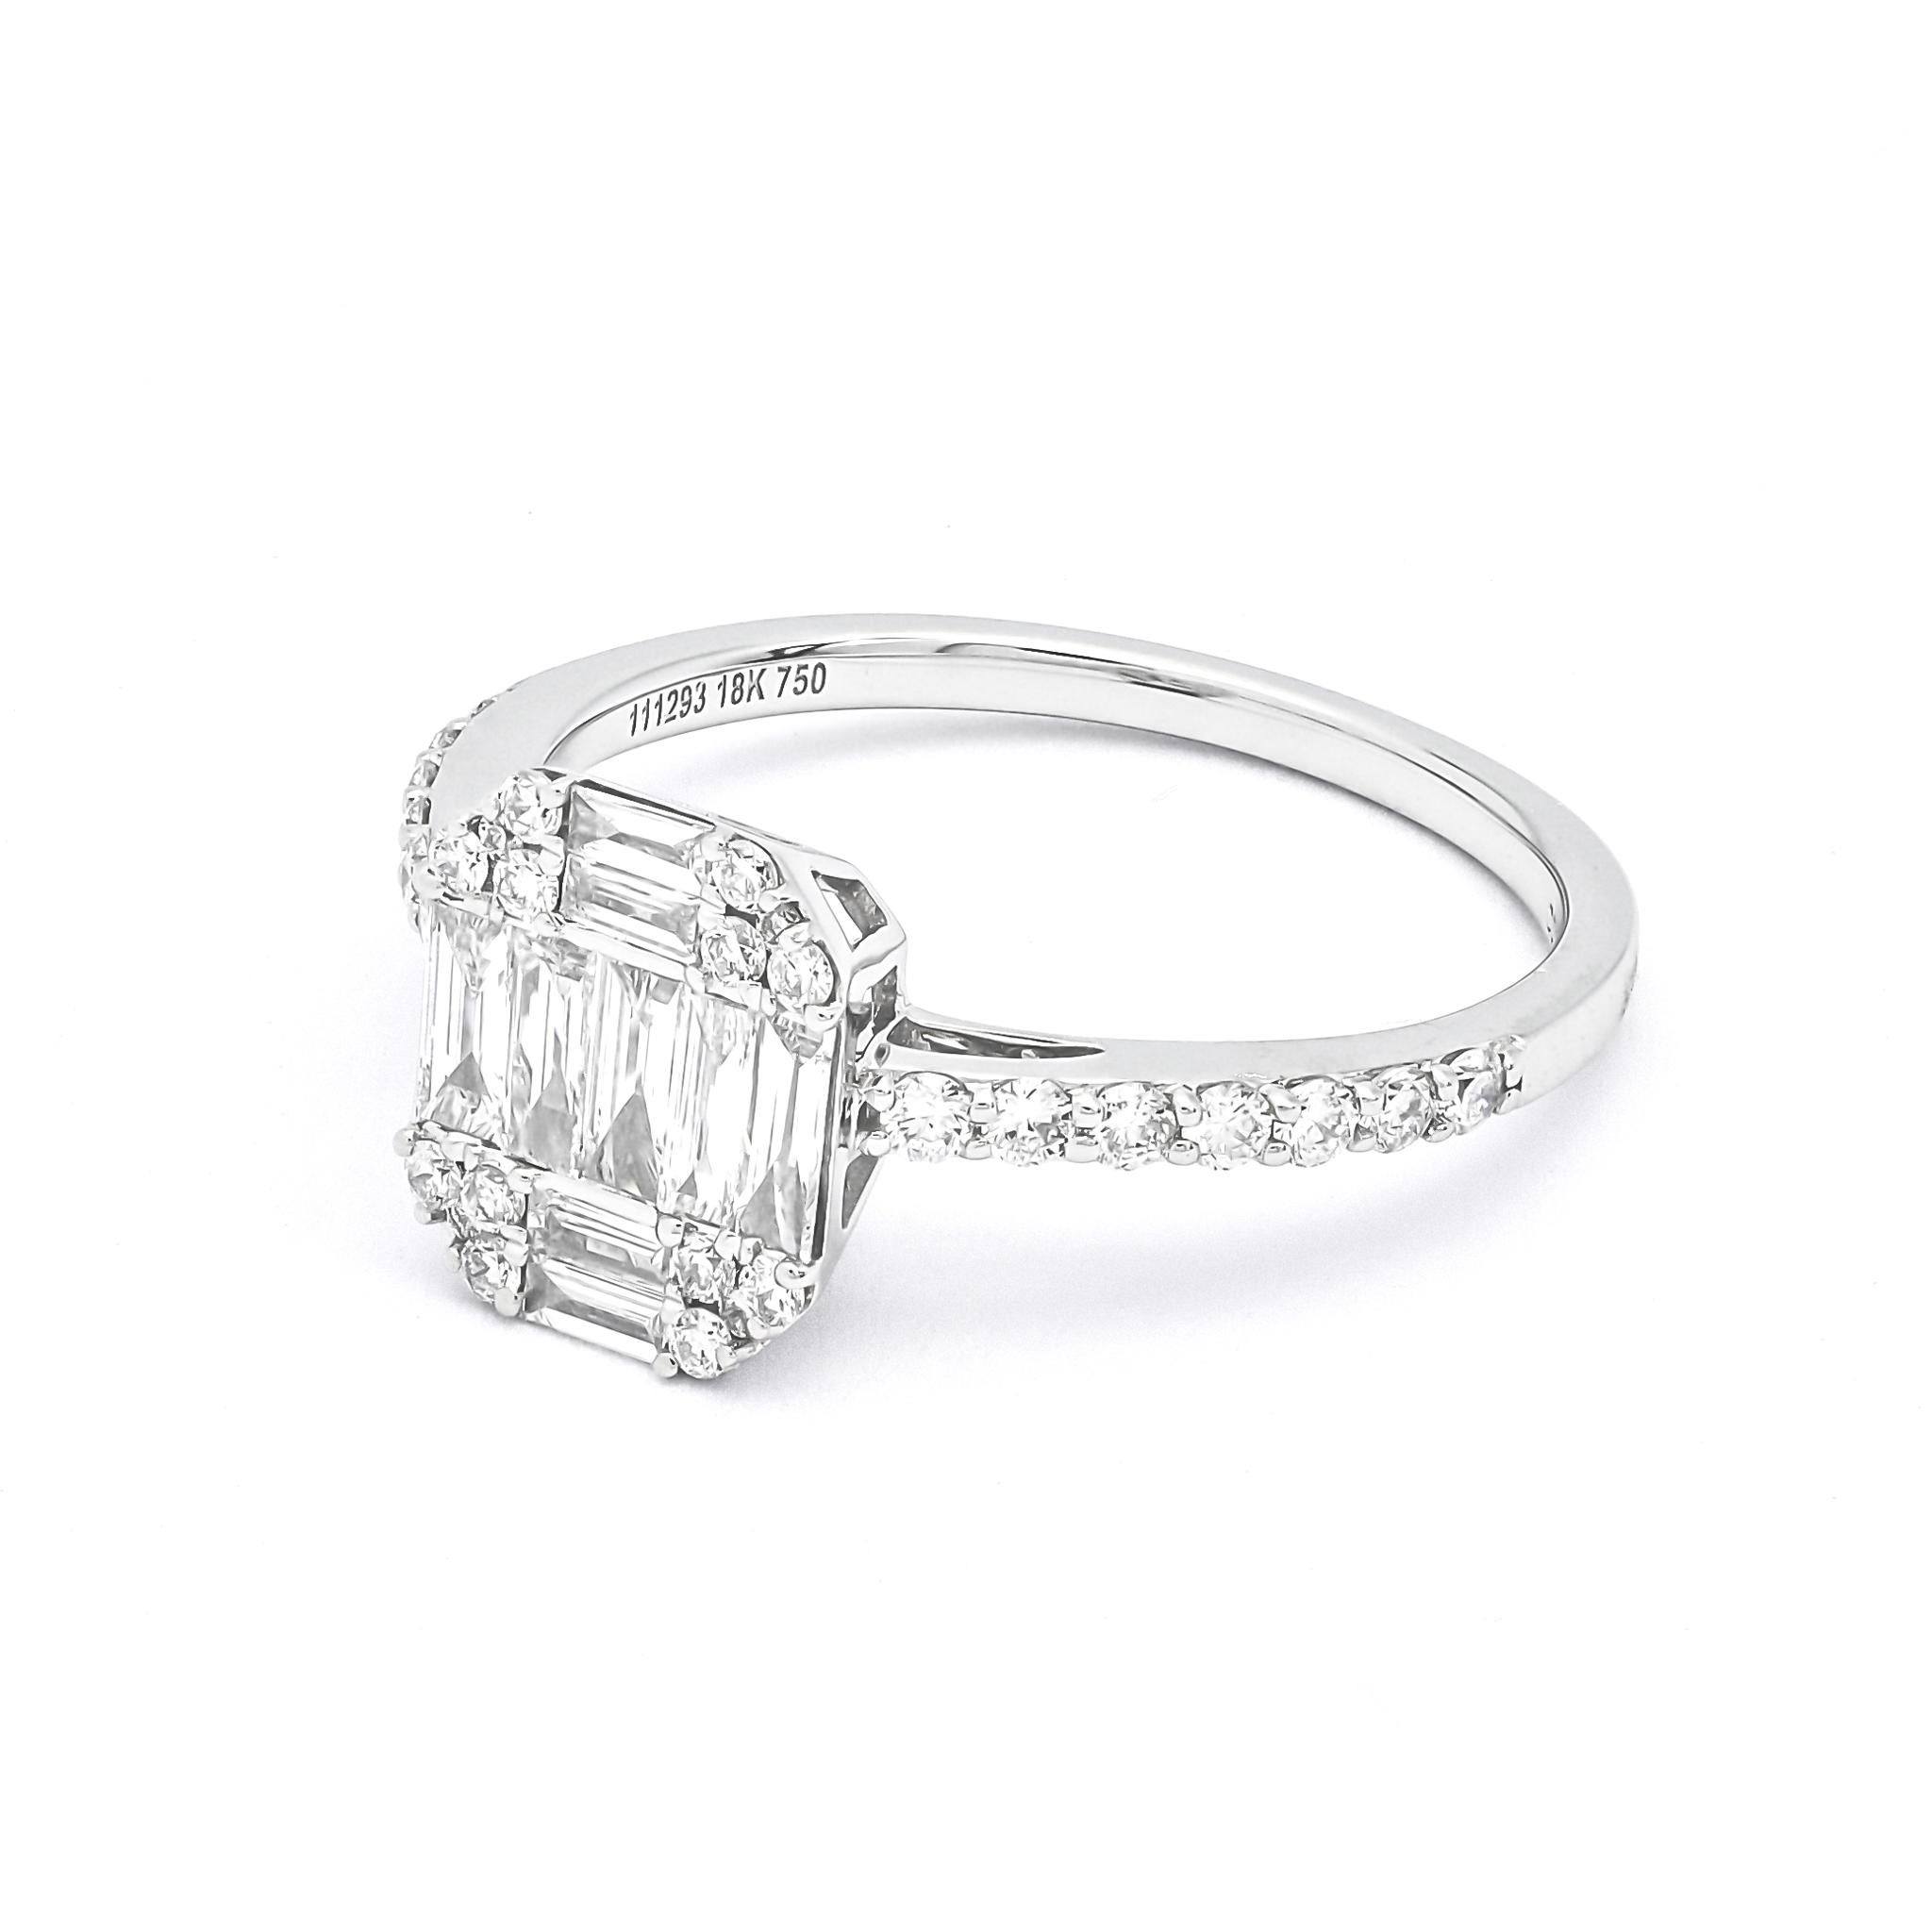 18KT White Gold Cluster Natural Diamonds Ring, Delicate Engagement Ring 4